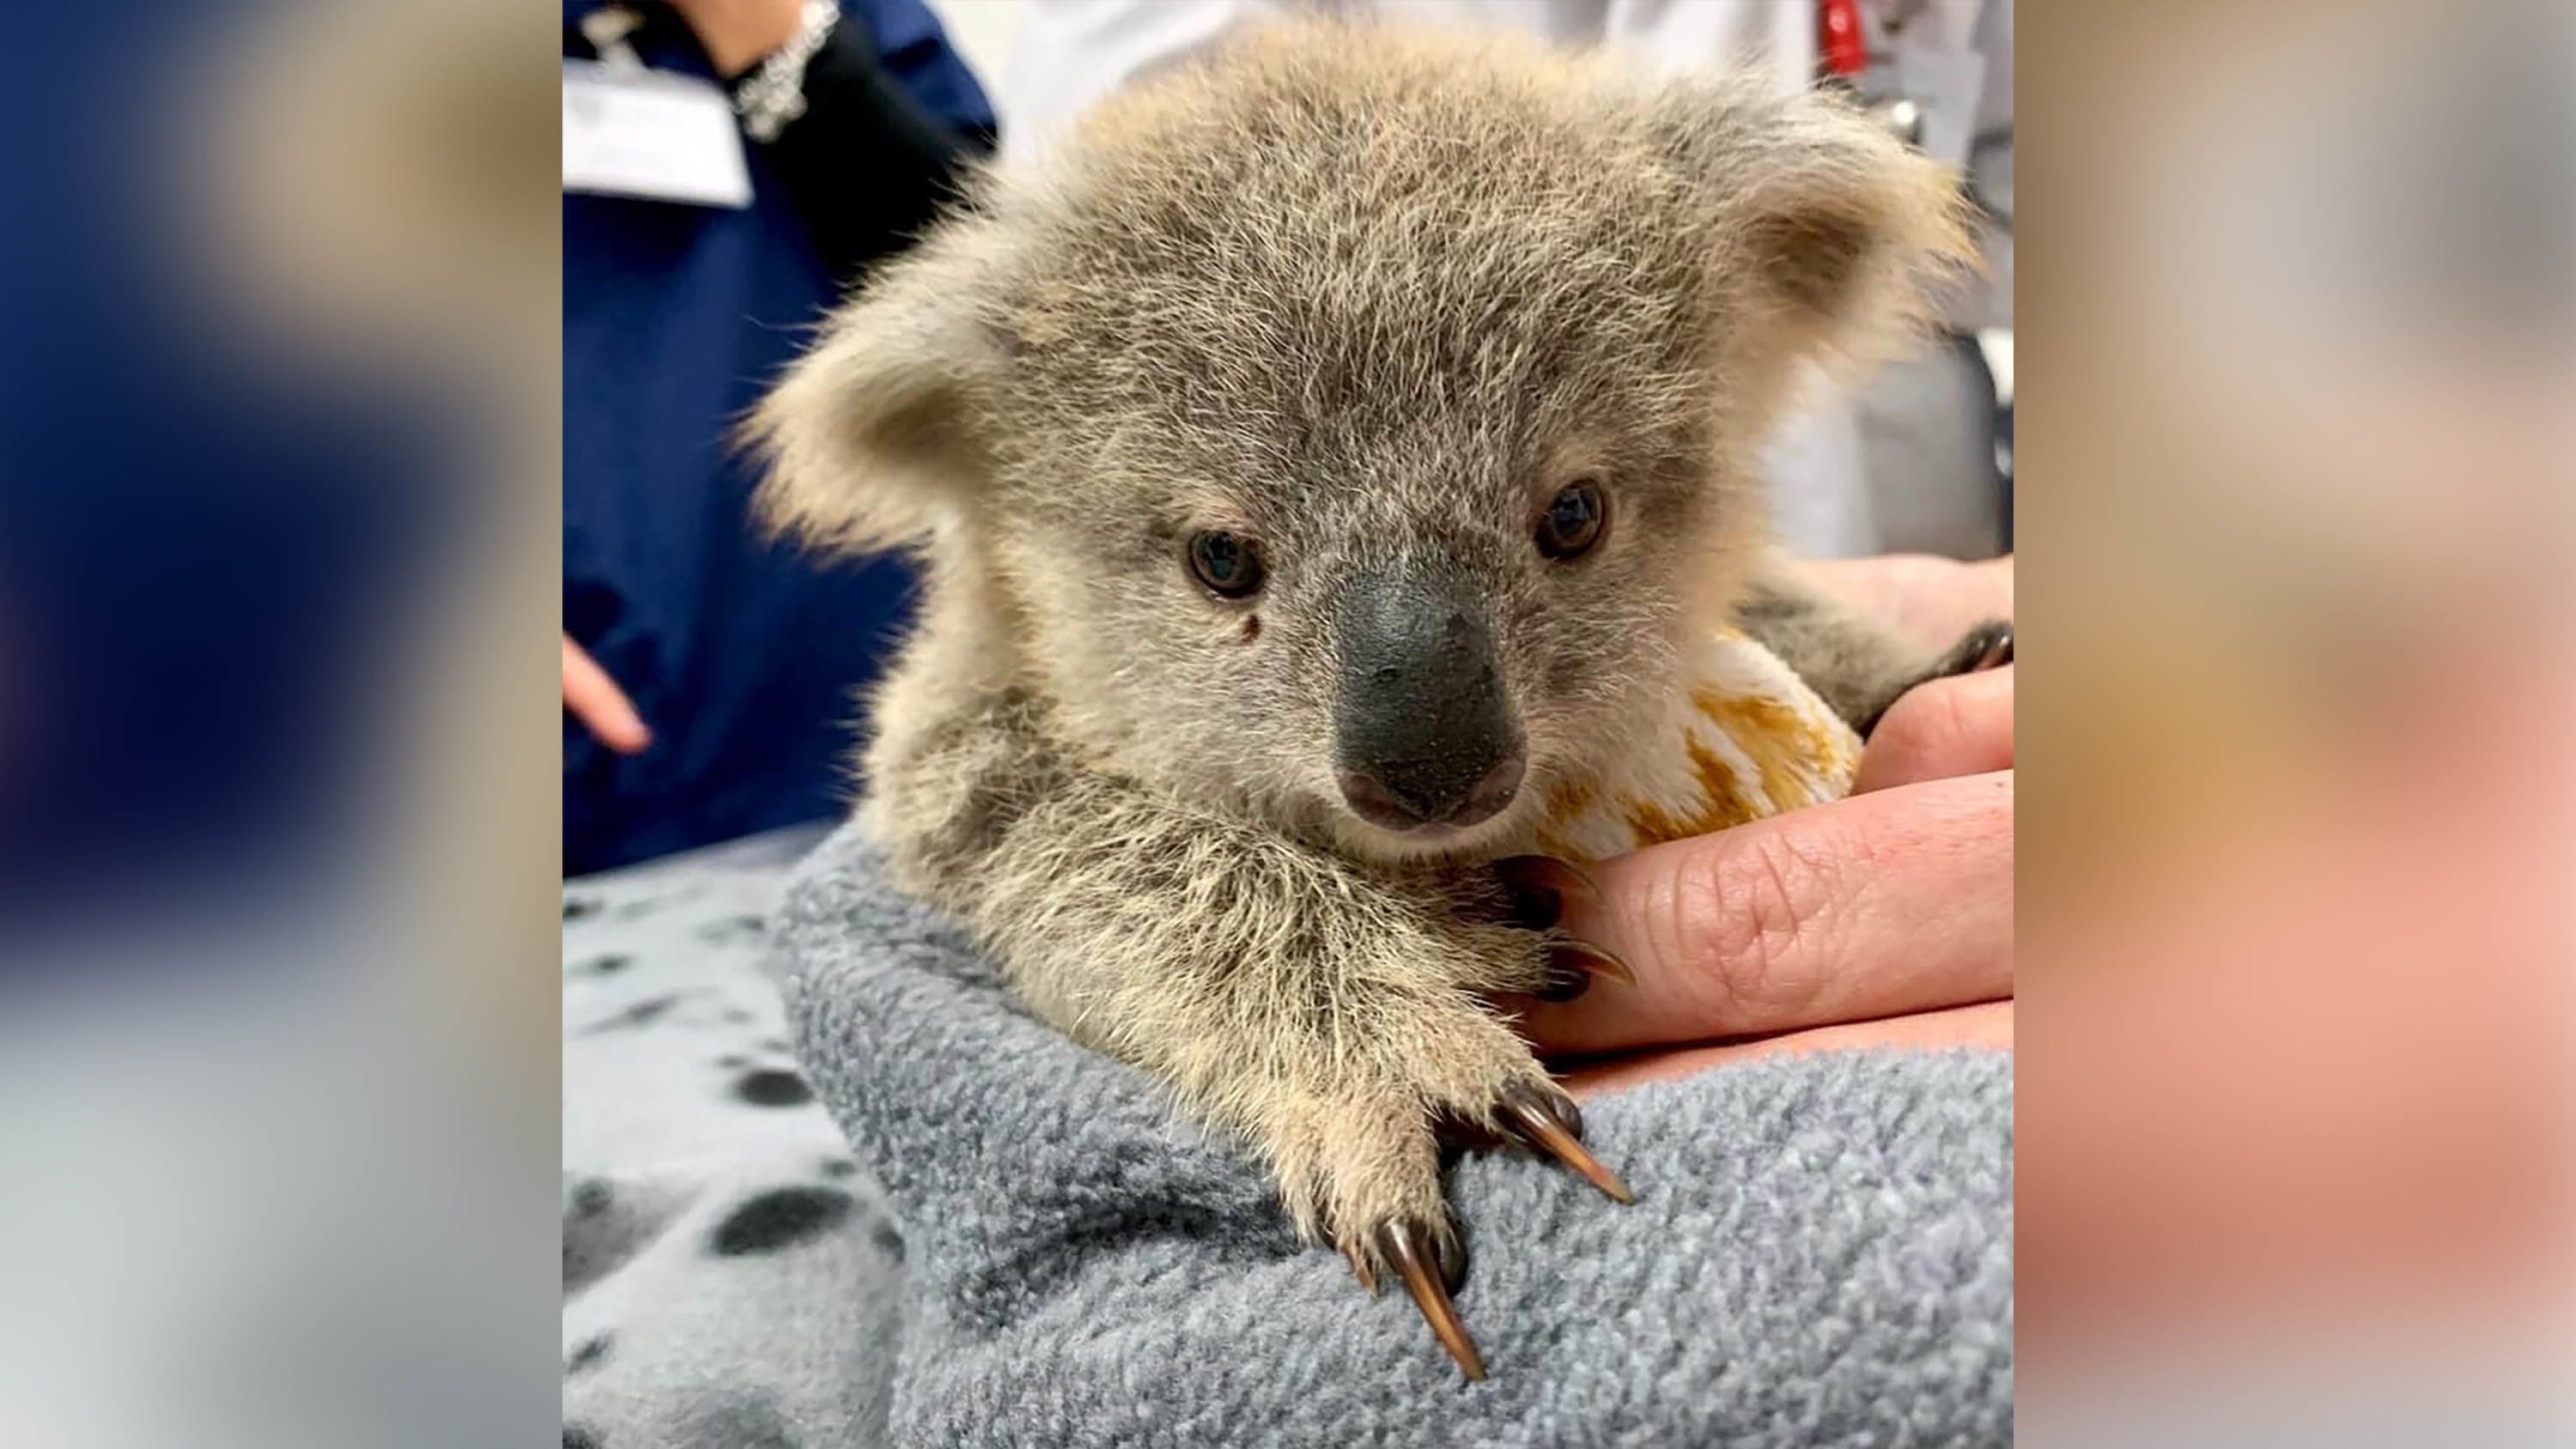 Australian wildlife charities say they have plenty of pouches for injured  koalas and kangaroos, so please stop sending them | CNN